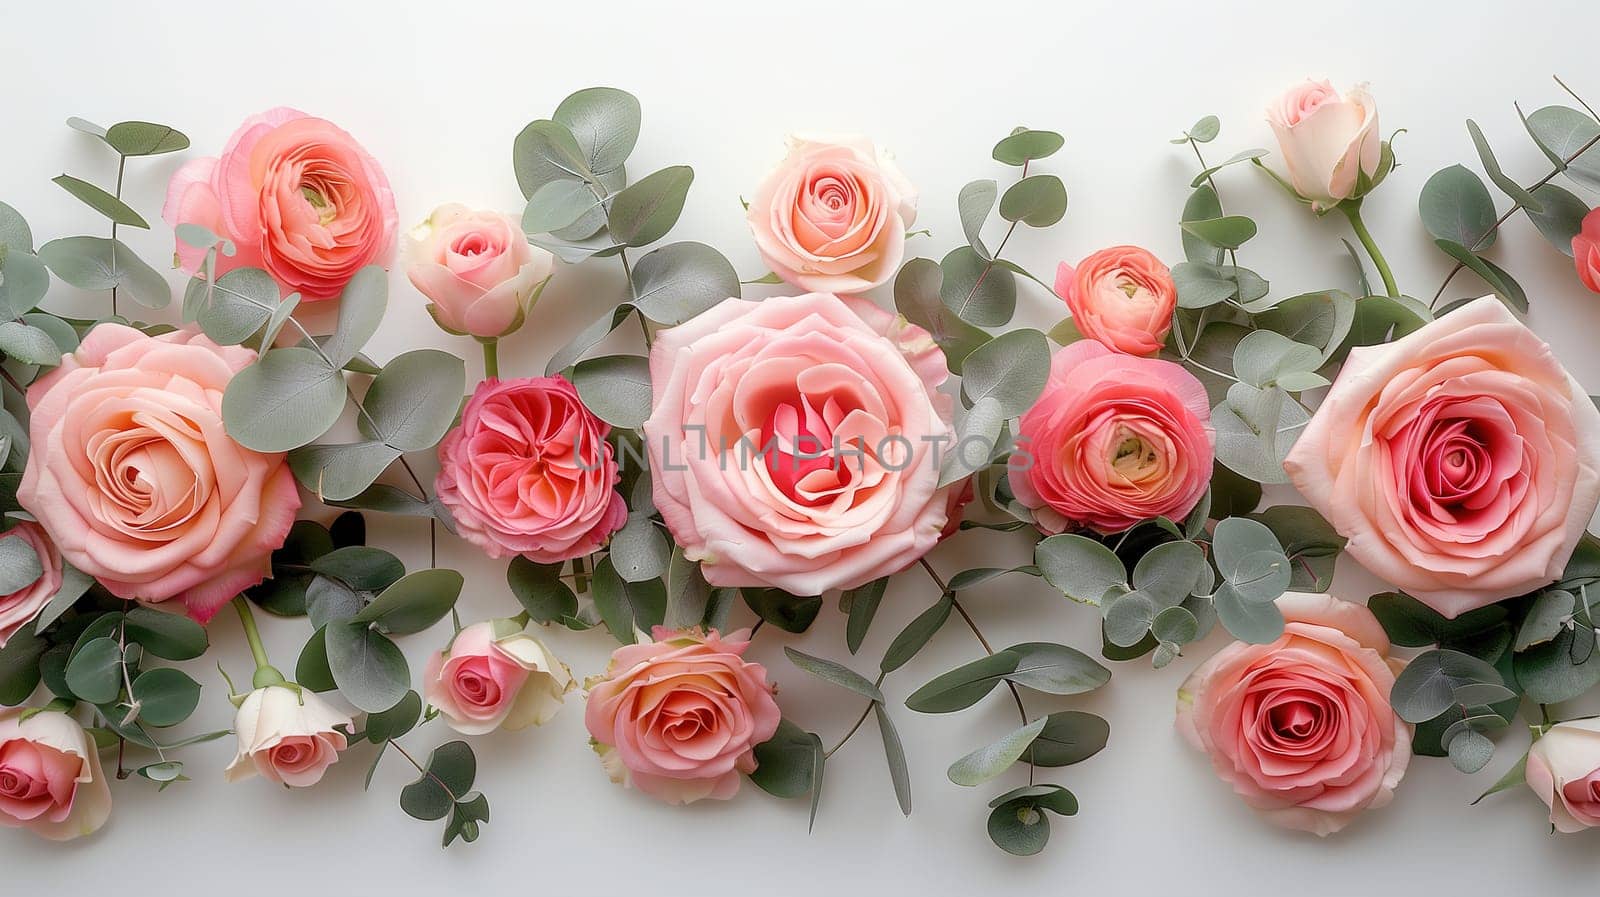 Group of Pink Roses With Green Leaves by TRMK